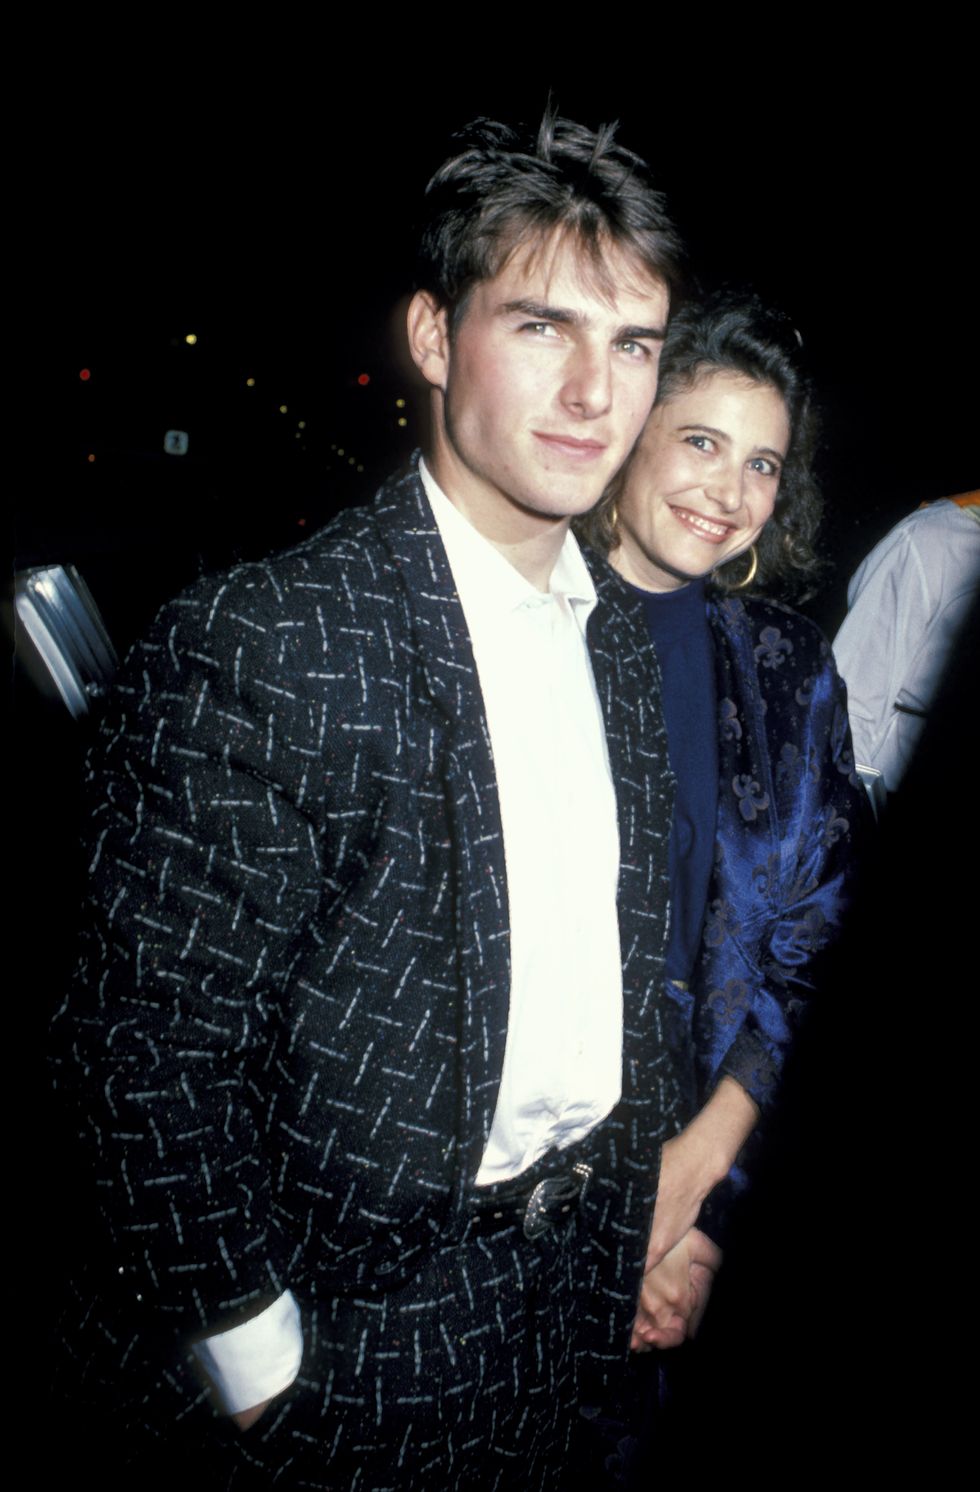 "The Color of Money" New York Premiere - October 8, 1986